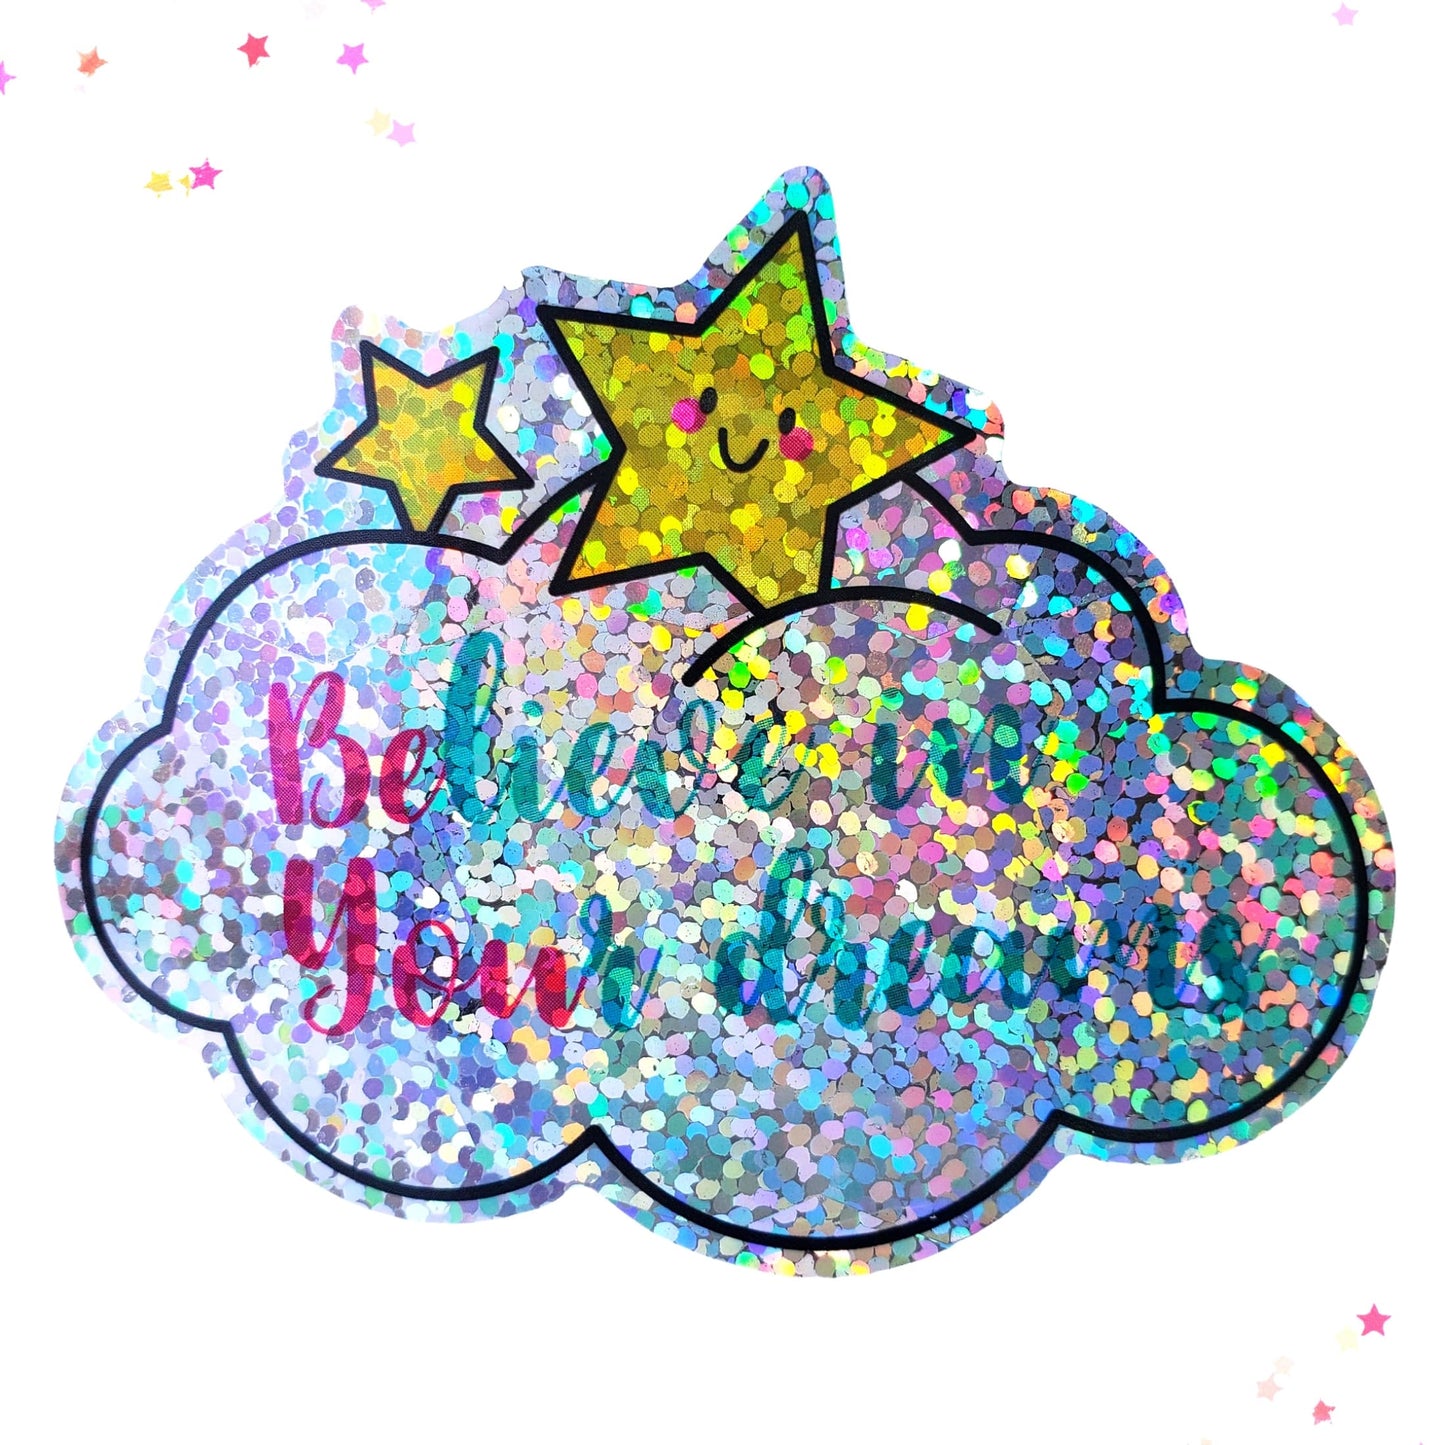 Premium Sticker - Sparkly Holographic Glitter Believe in Your Dreams from Confetti Kitty, Only 2.00